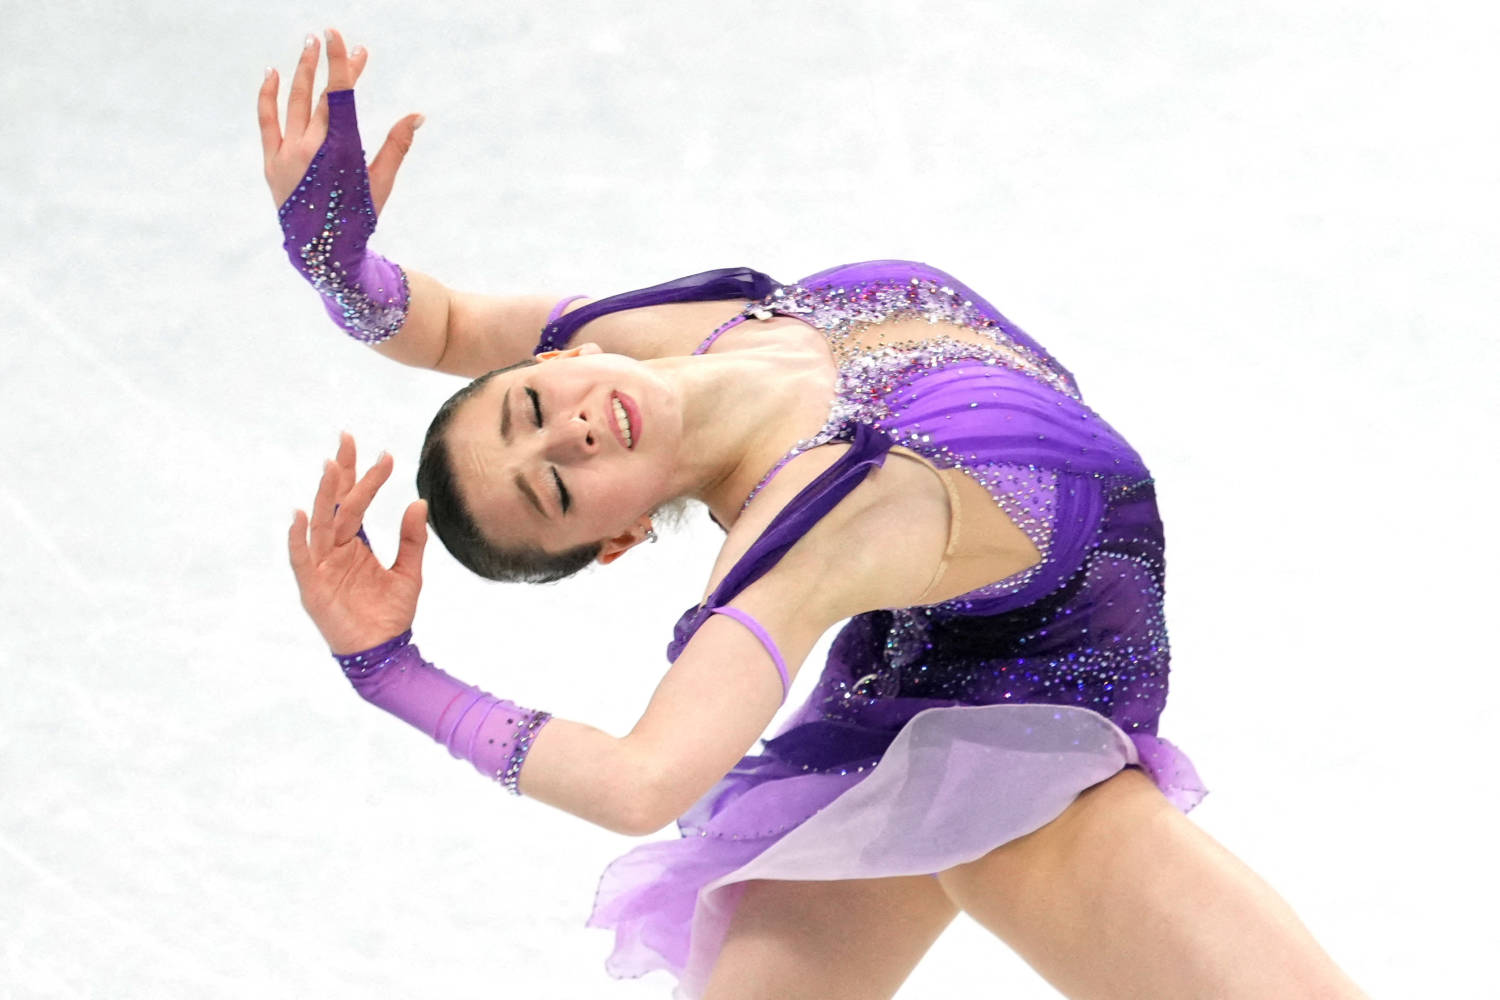 File Photo: Kamila Valieva Of The Russian Olympic Committee In Action